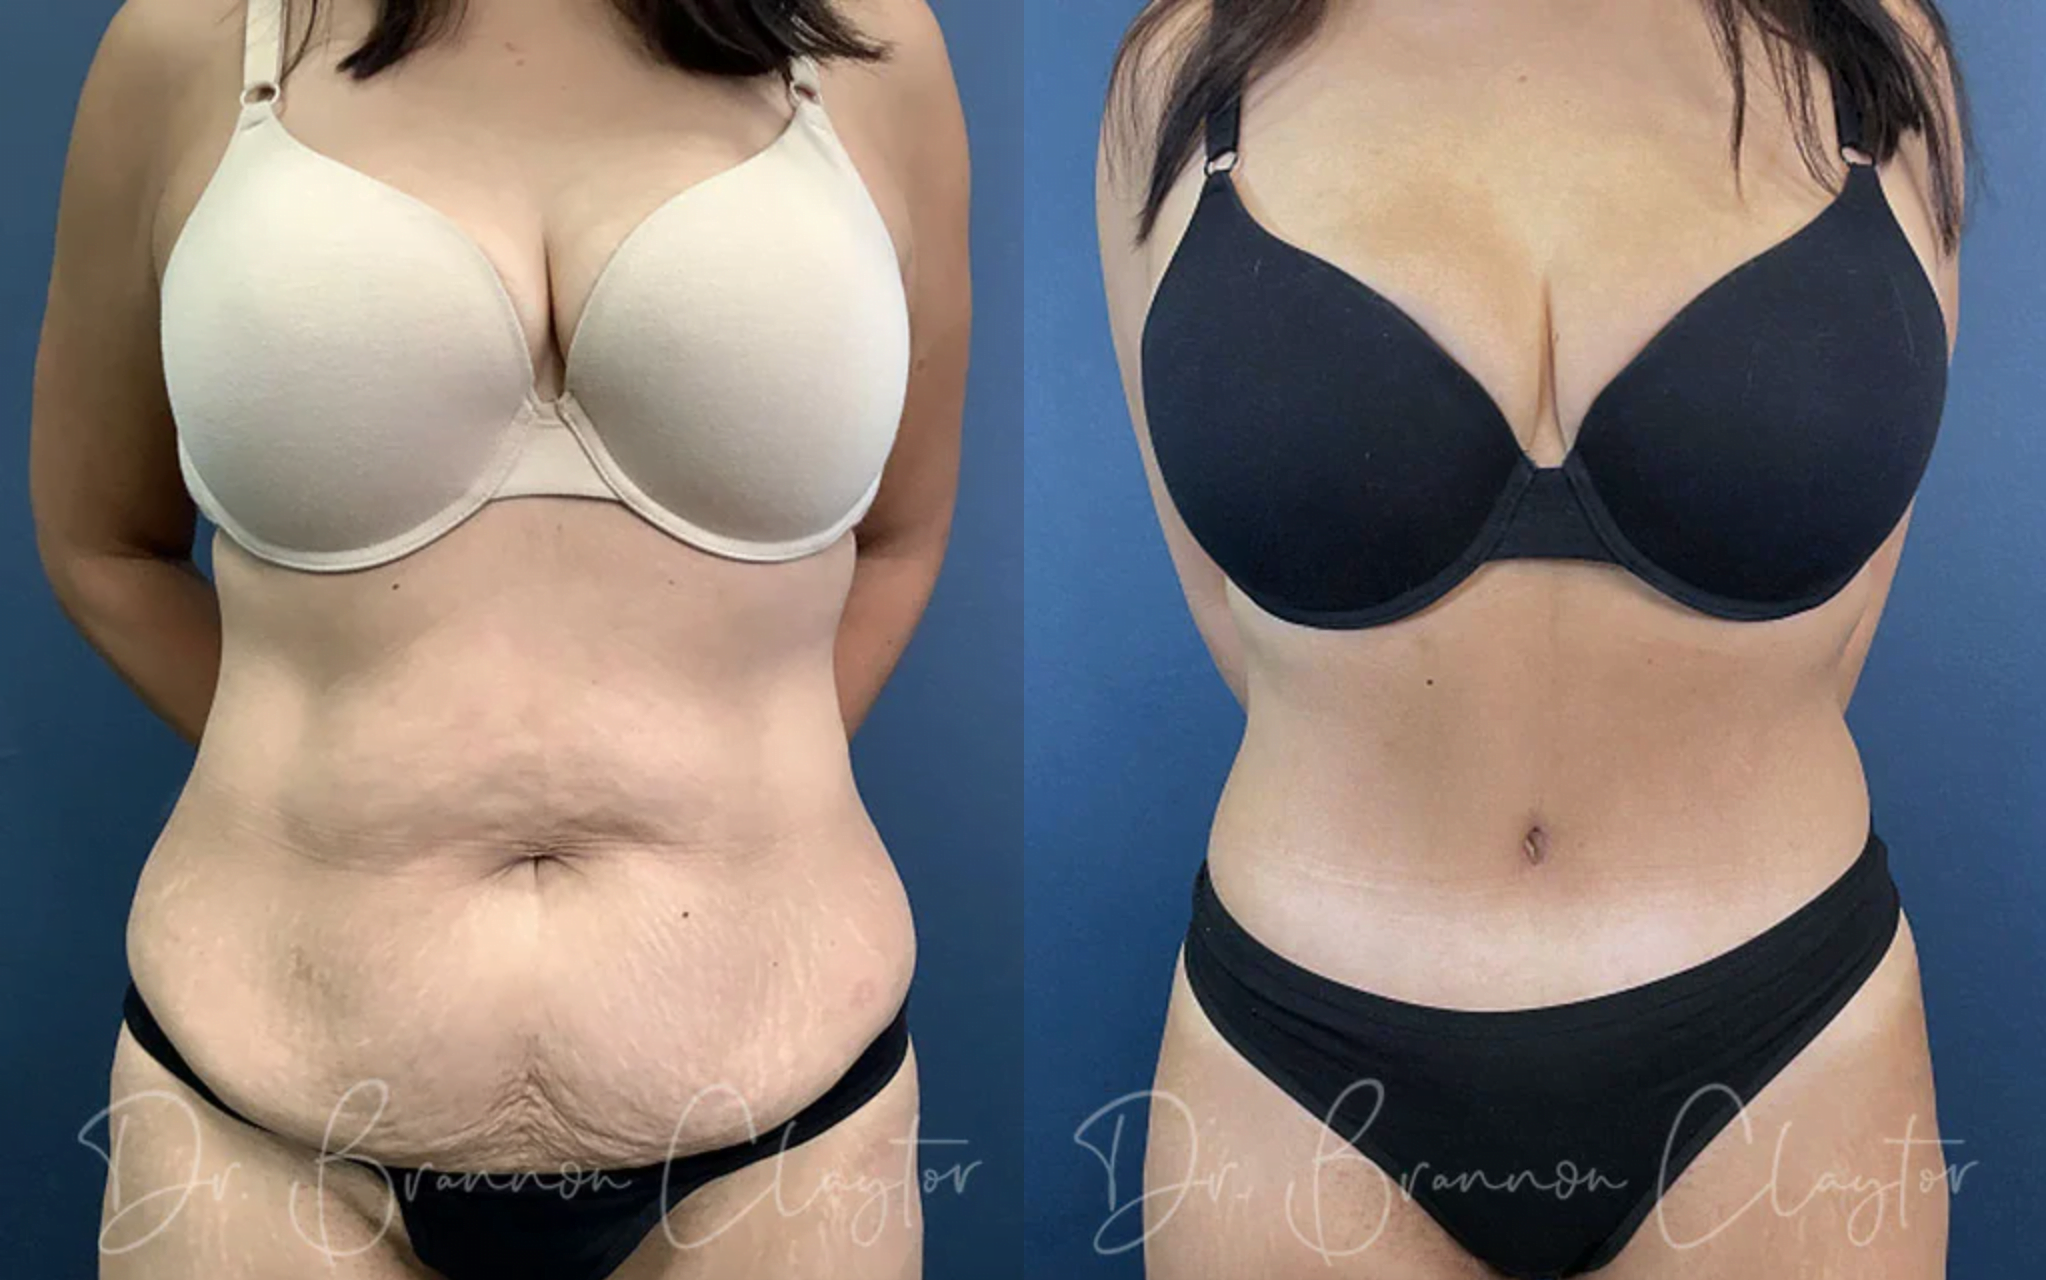 Before and after drainless tummy tuck by Dr. Claytor at Claytor Noone Plastic Surgery